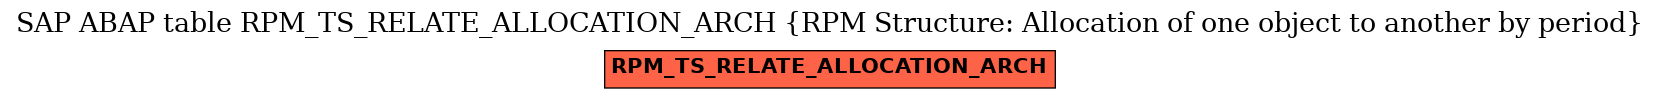 E-R Diagram for table RPM_TS_RELATE_ALLOCATION_ARCH (RPM Structure: Allocation of one object to another by period)